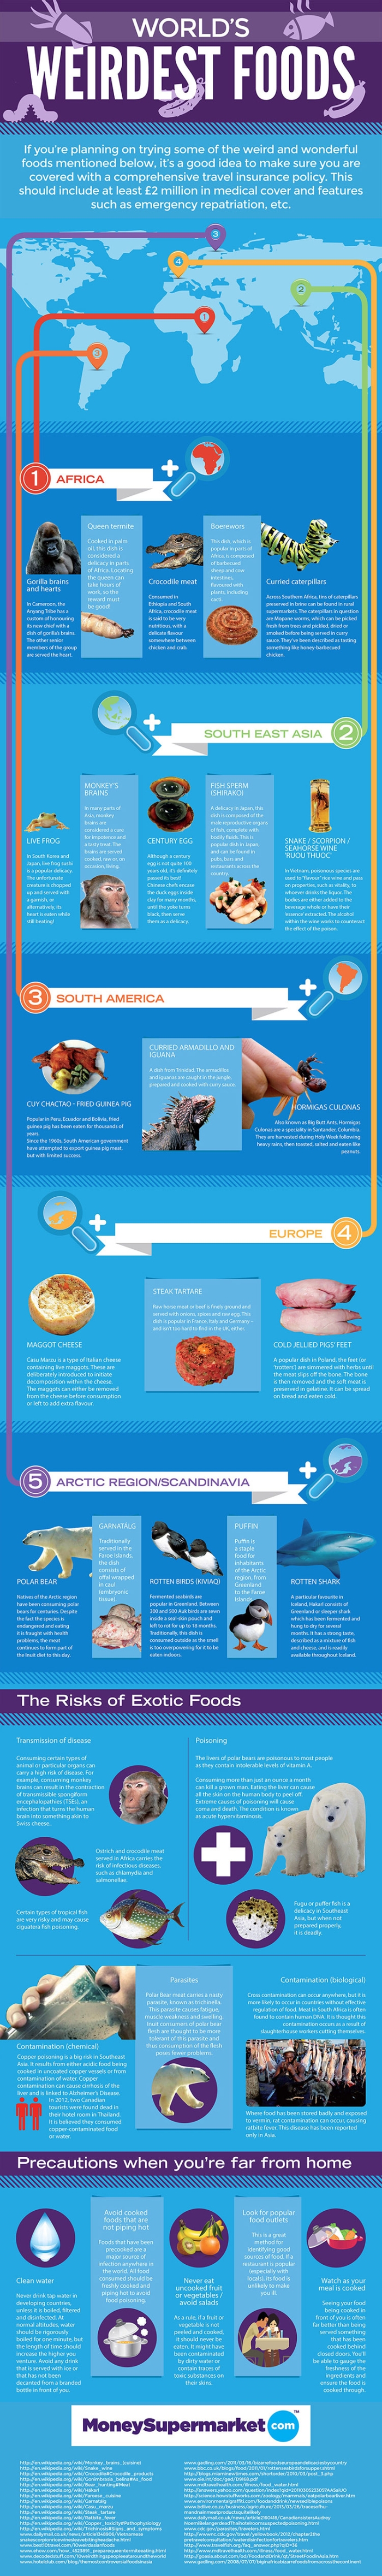 The Weirdest Foods From All Over The World (infographic)